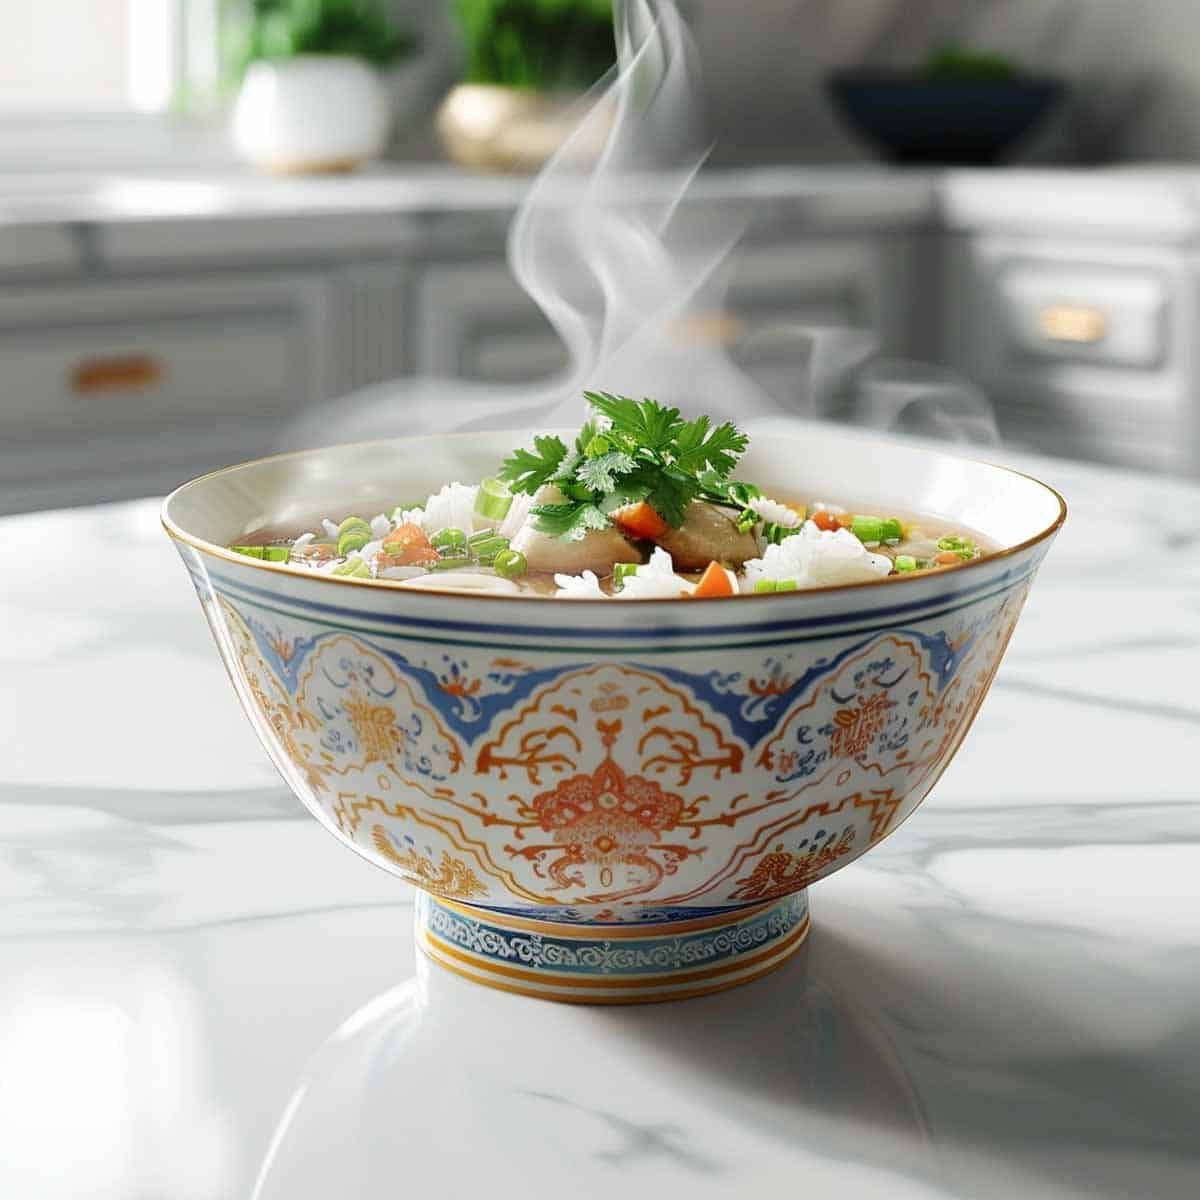 A vibrant image of a bowl of Khao Tom, or Thai Rice Soup, in a beautifully designed Asian-style bowl. The bowl features intricate patterns and colors, enhancing the visual appeal of the steaming soup. It is filled with soft, fluffy rice and pieces of tender chicken, garnished with bright green cilantro and thinly sliced green onions, adding a fresh contrast to the warm, savory broth.